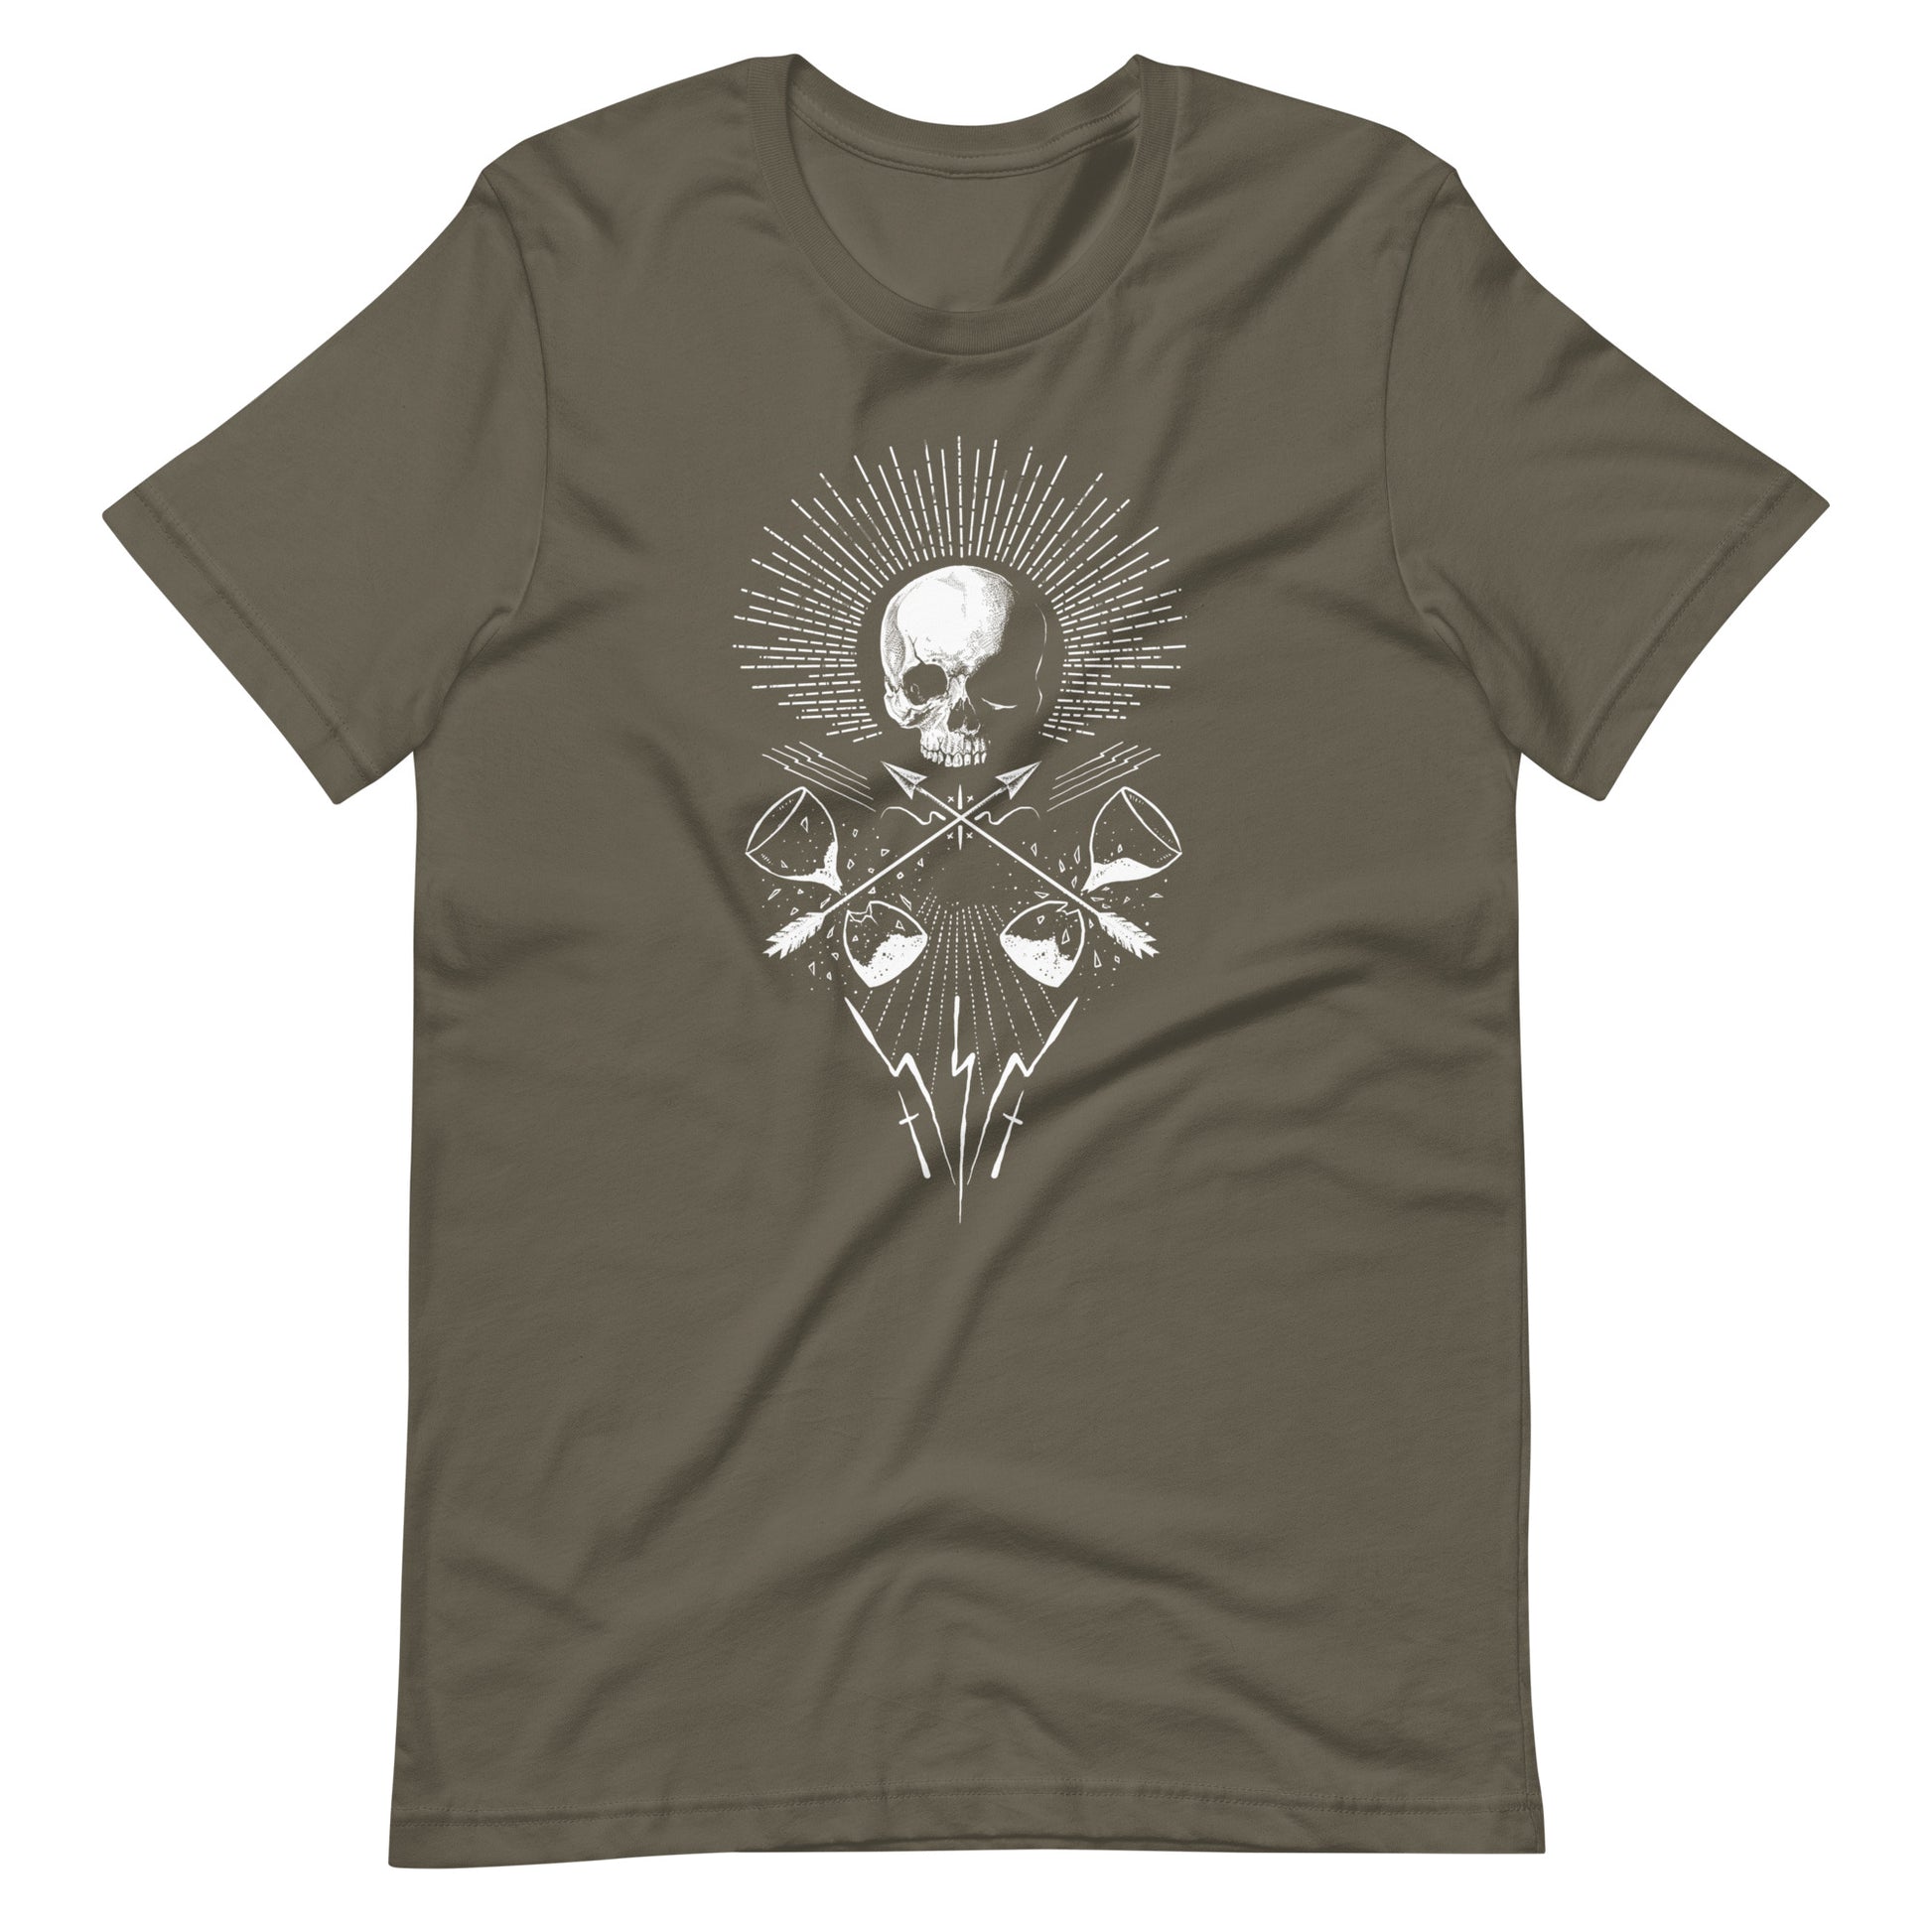 For the Sake of Future - Men's t-shirt - Army Front